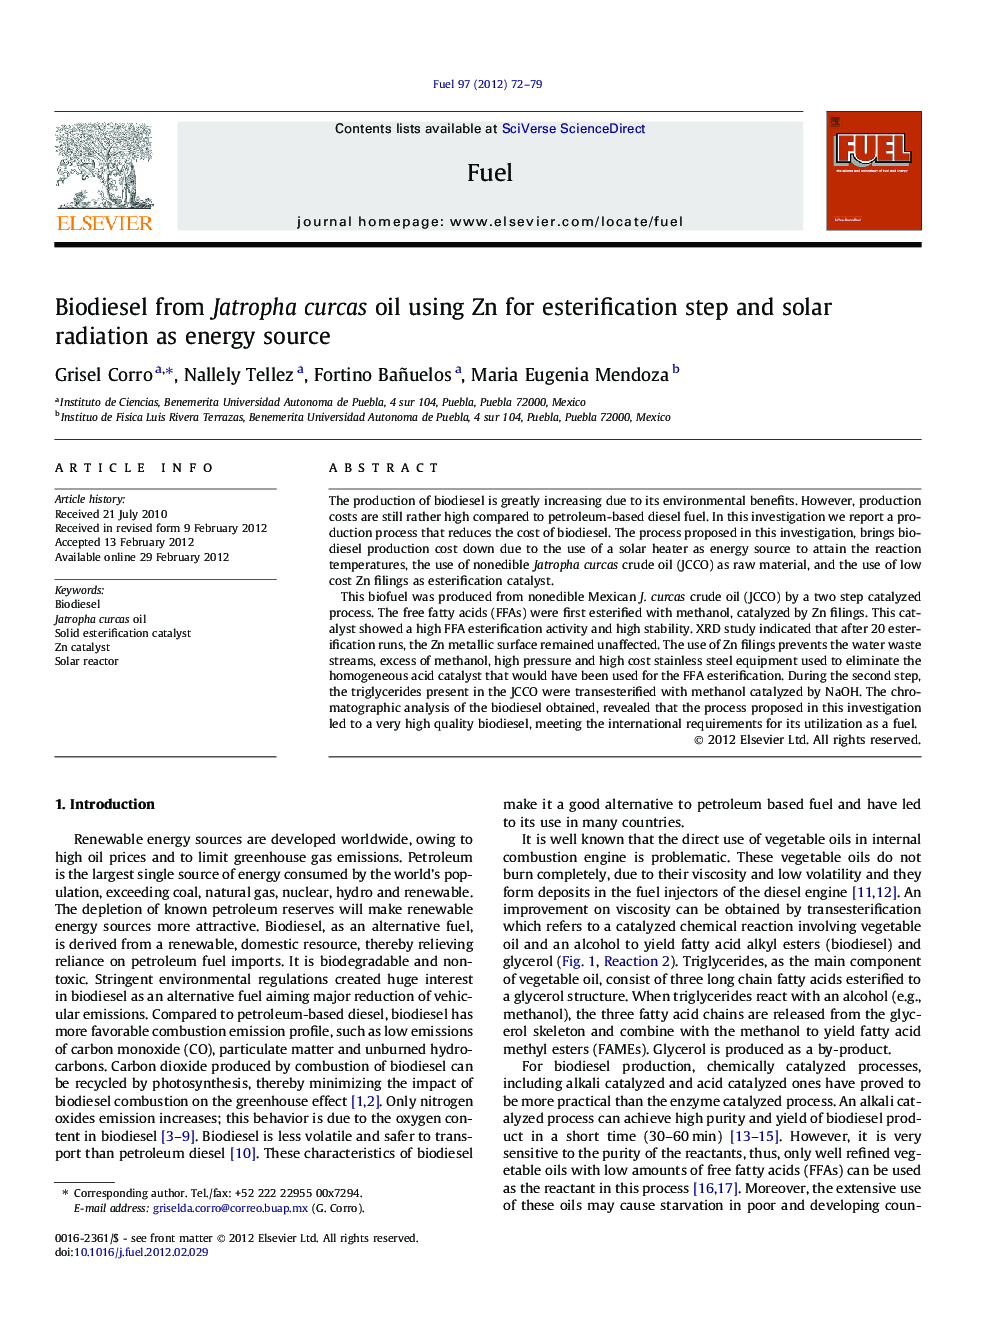 Biodiesel from Jatropha curcas oil using Zn for esterification step and solar radiation as energy source